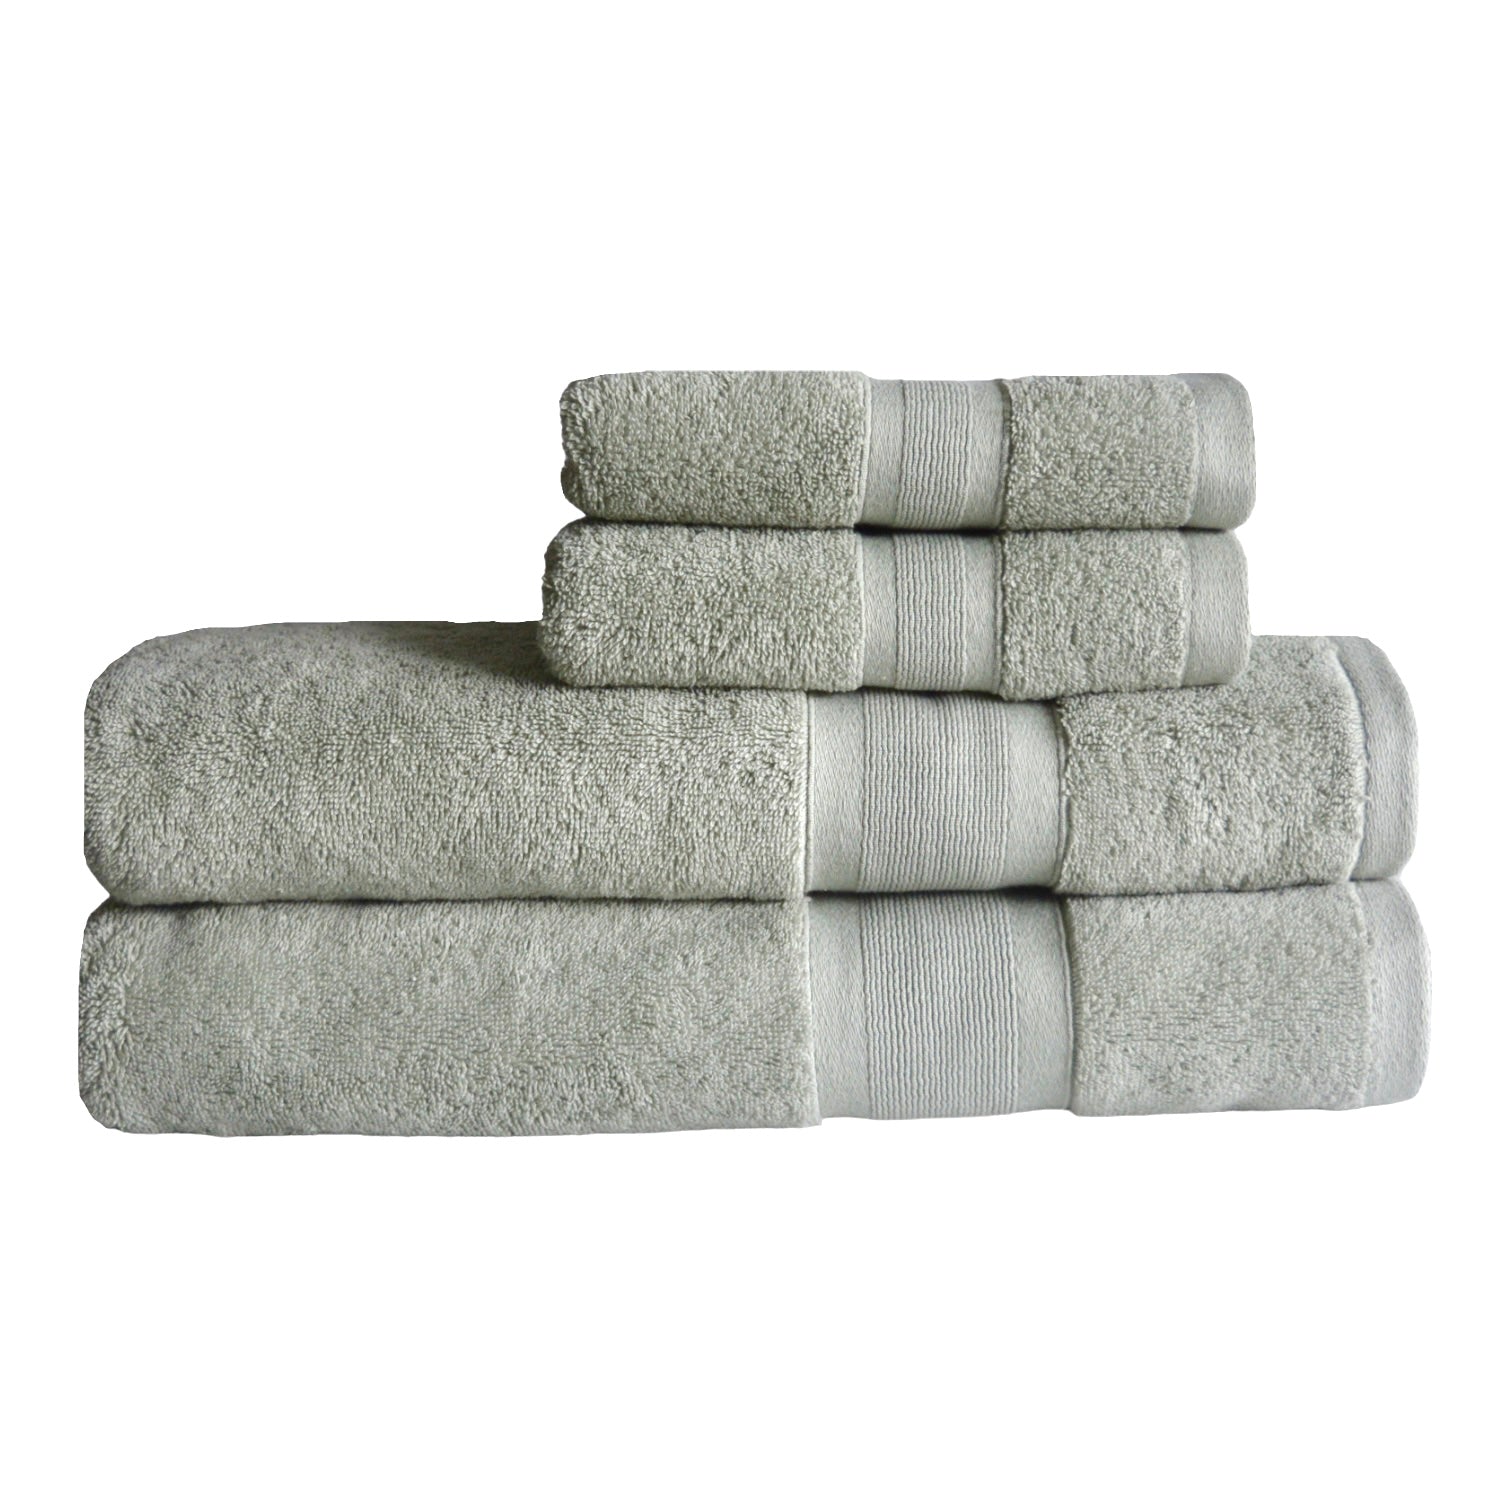 Combed Turkish Cotton Towel Set in Pale Sage color – Moon Mountain